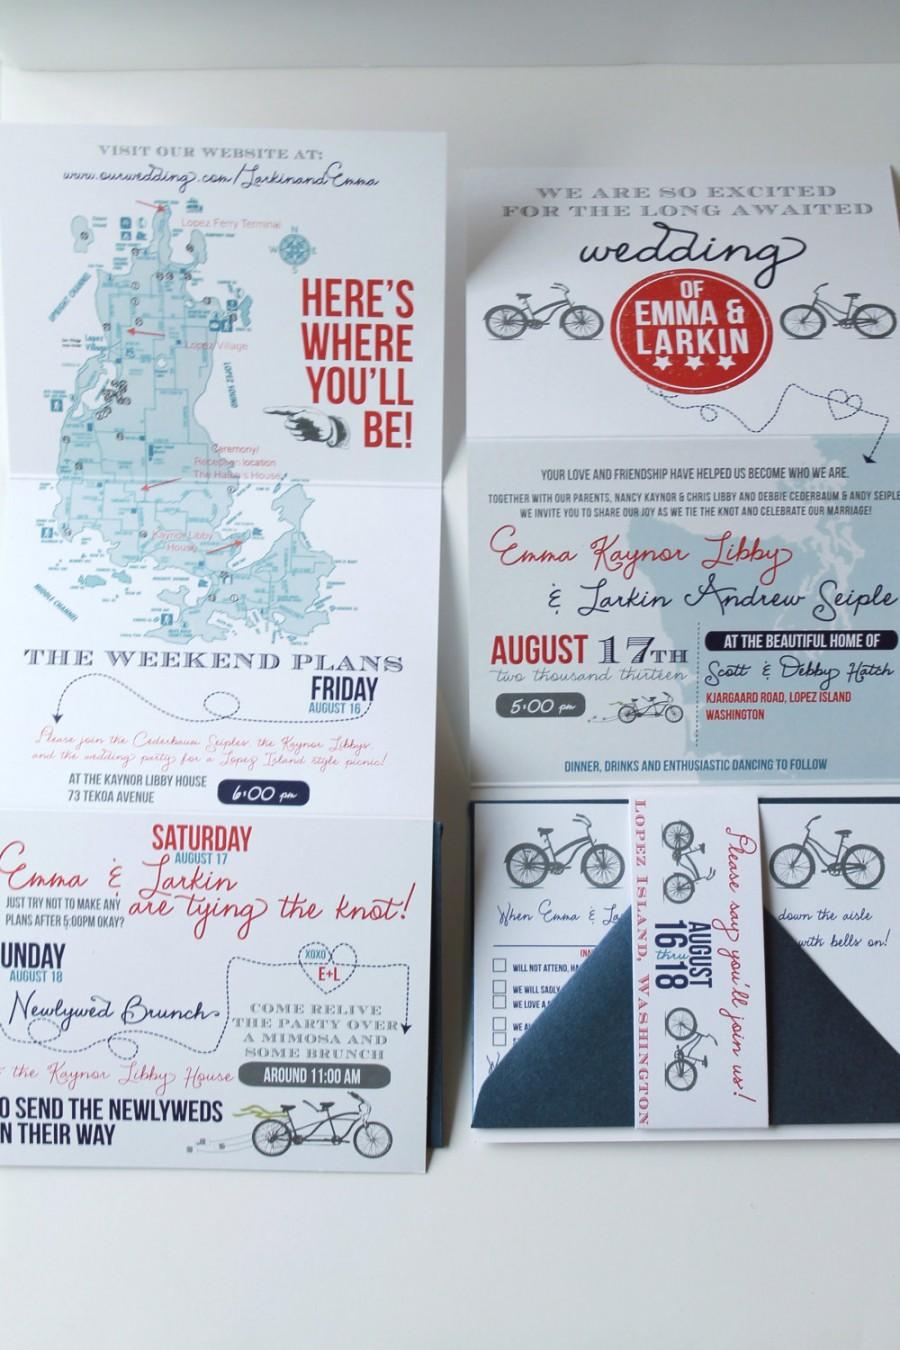 Hochzeit - Z-fold wedding invitation with casual bike wedding weekend itinerary, unique invite with bellyband typography map design - DEPOSIT LISTING